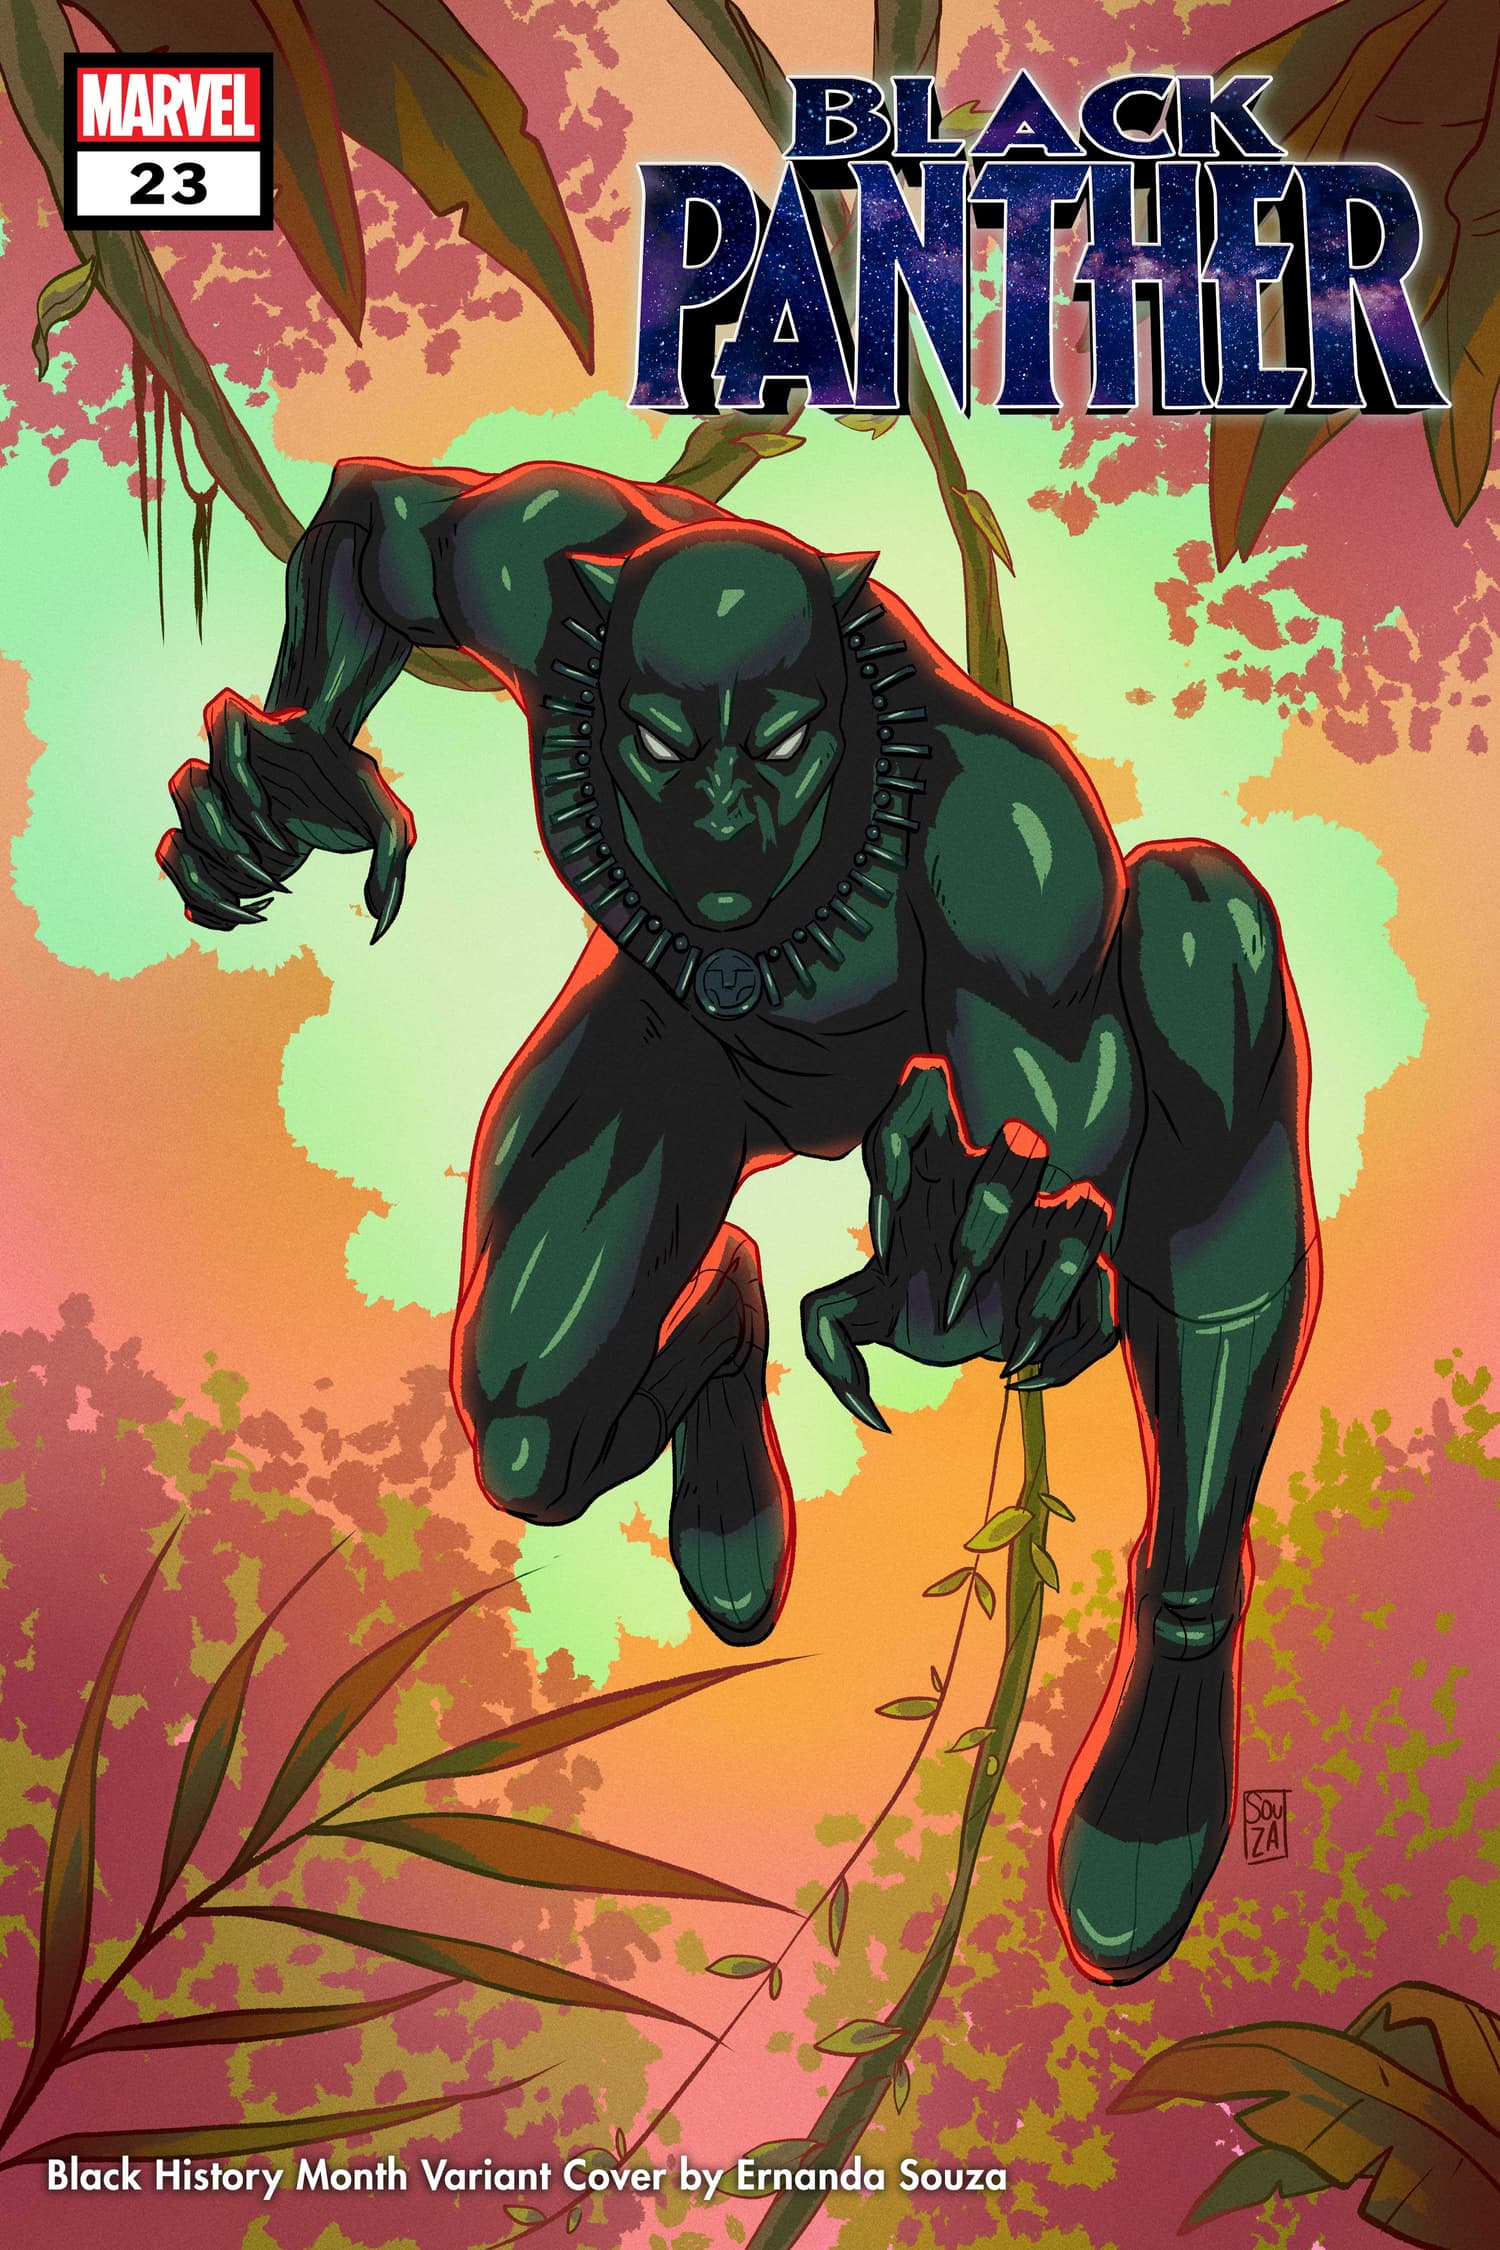 BLACK PANTHER #23 Black History Month Variant Cover by Ernanda Souza